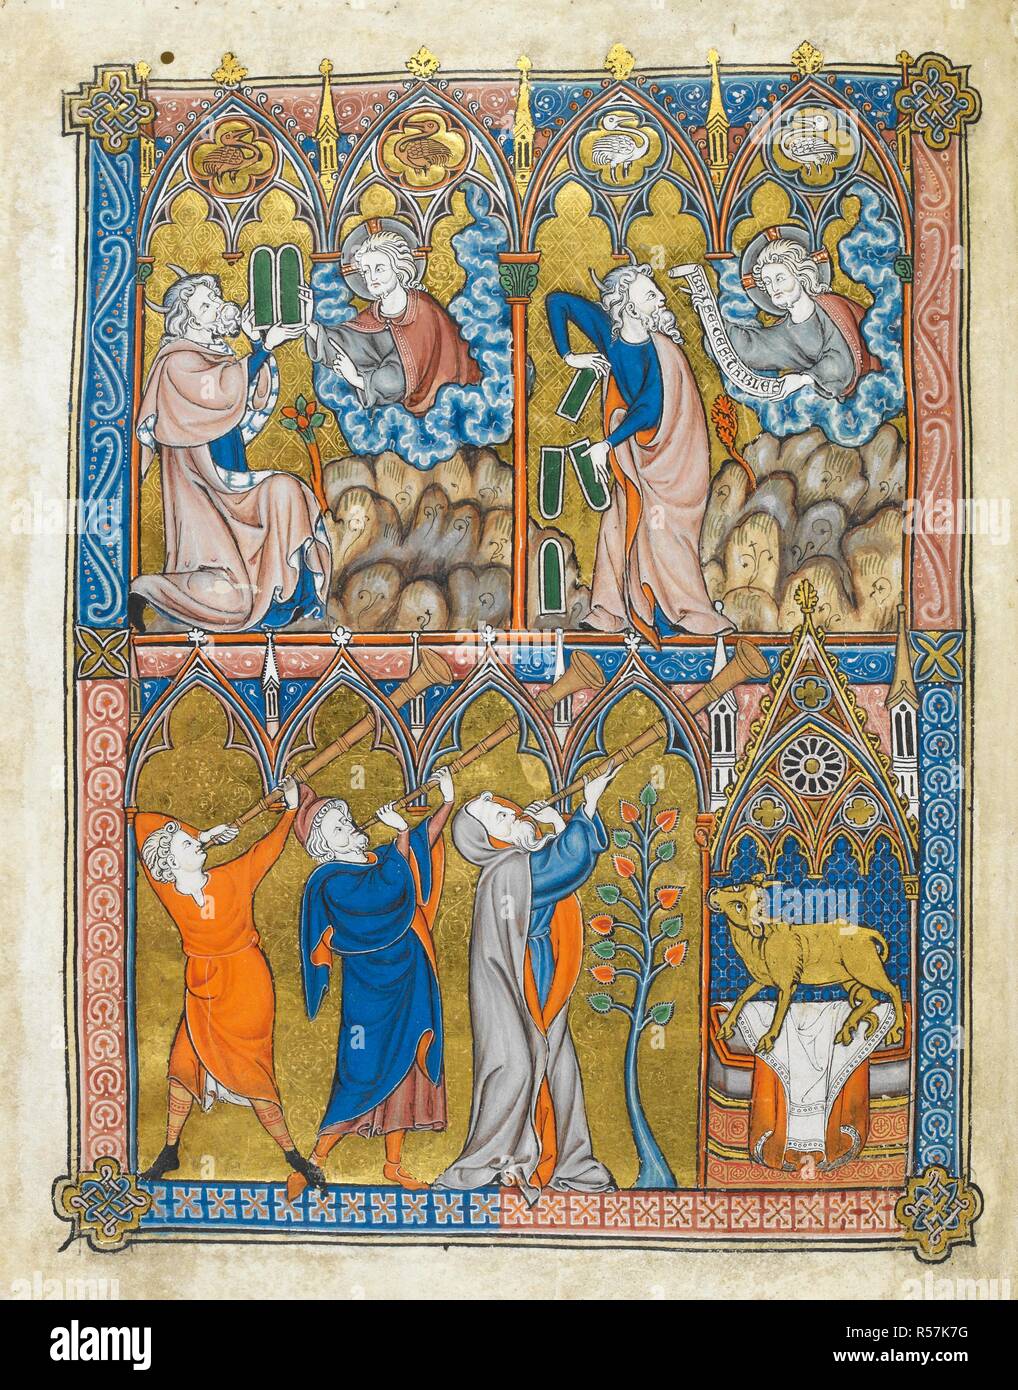 Moses and the commandments.   Above left; Moses receives the commandments from God. Above right, he breaks the tablets, before God who holds a scroll. Below left; three men blowing trumpets. Below right; the golden calf under an elaborate architectural canopy  . La Somme Le Roy. France [Paris or Maubuisson?]; between 1290 and 1300. Source: Add. 28162, f.2v. Language: Latin with French. Author: Laurent, Friar. Stock Photo